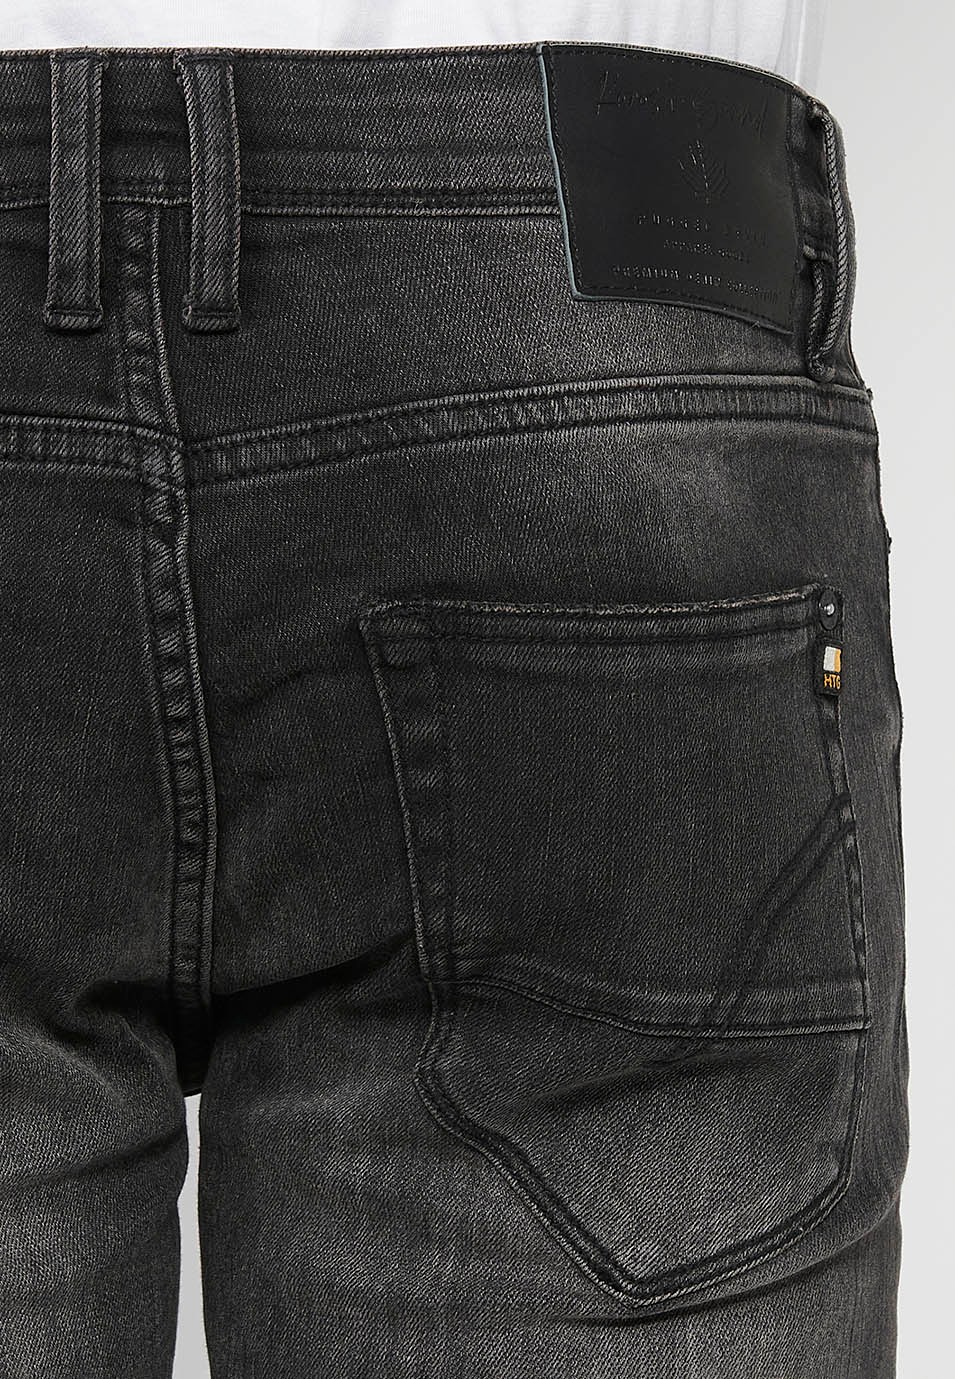 Regular fit long straight jeans with zipper and button front closure in Black Denim for Men 8